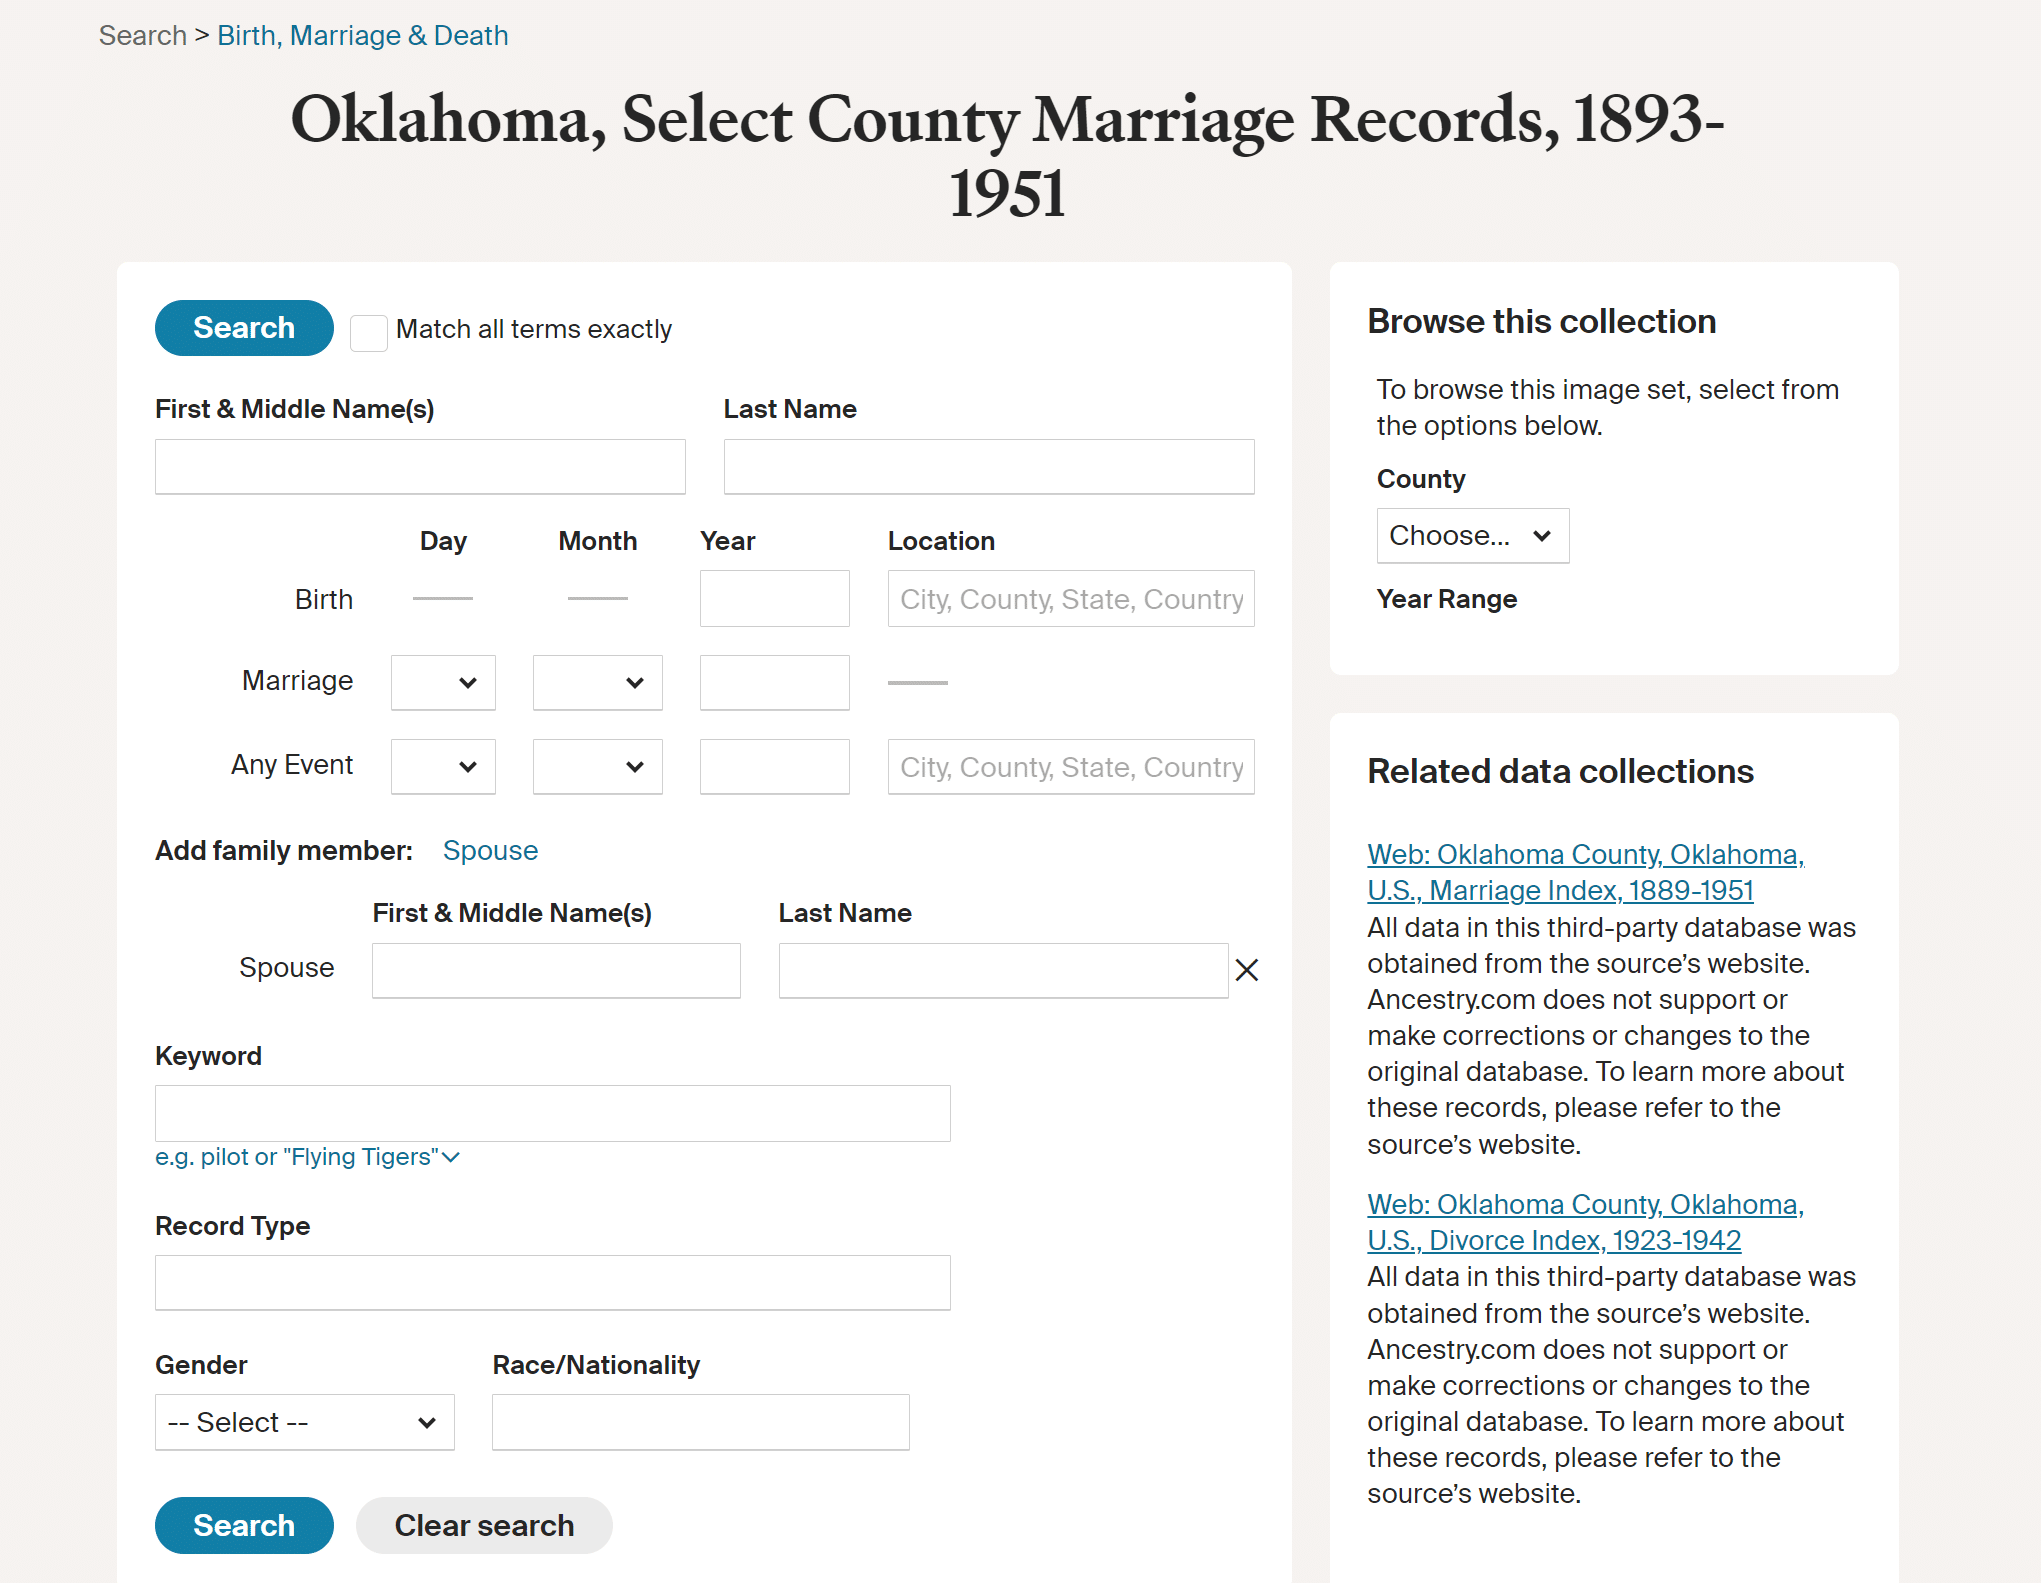 Ancestry Search for Individual Collection